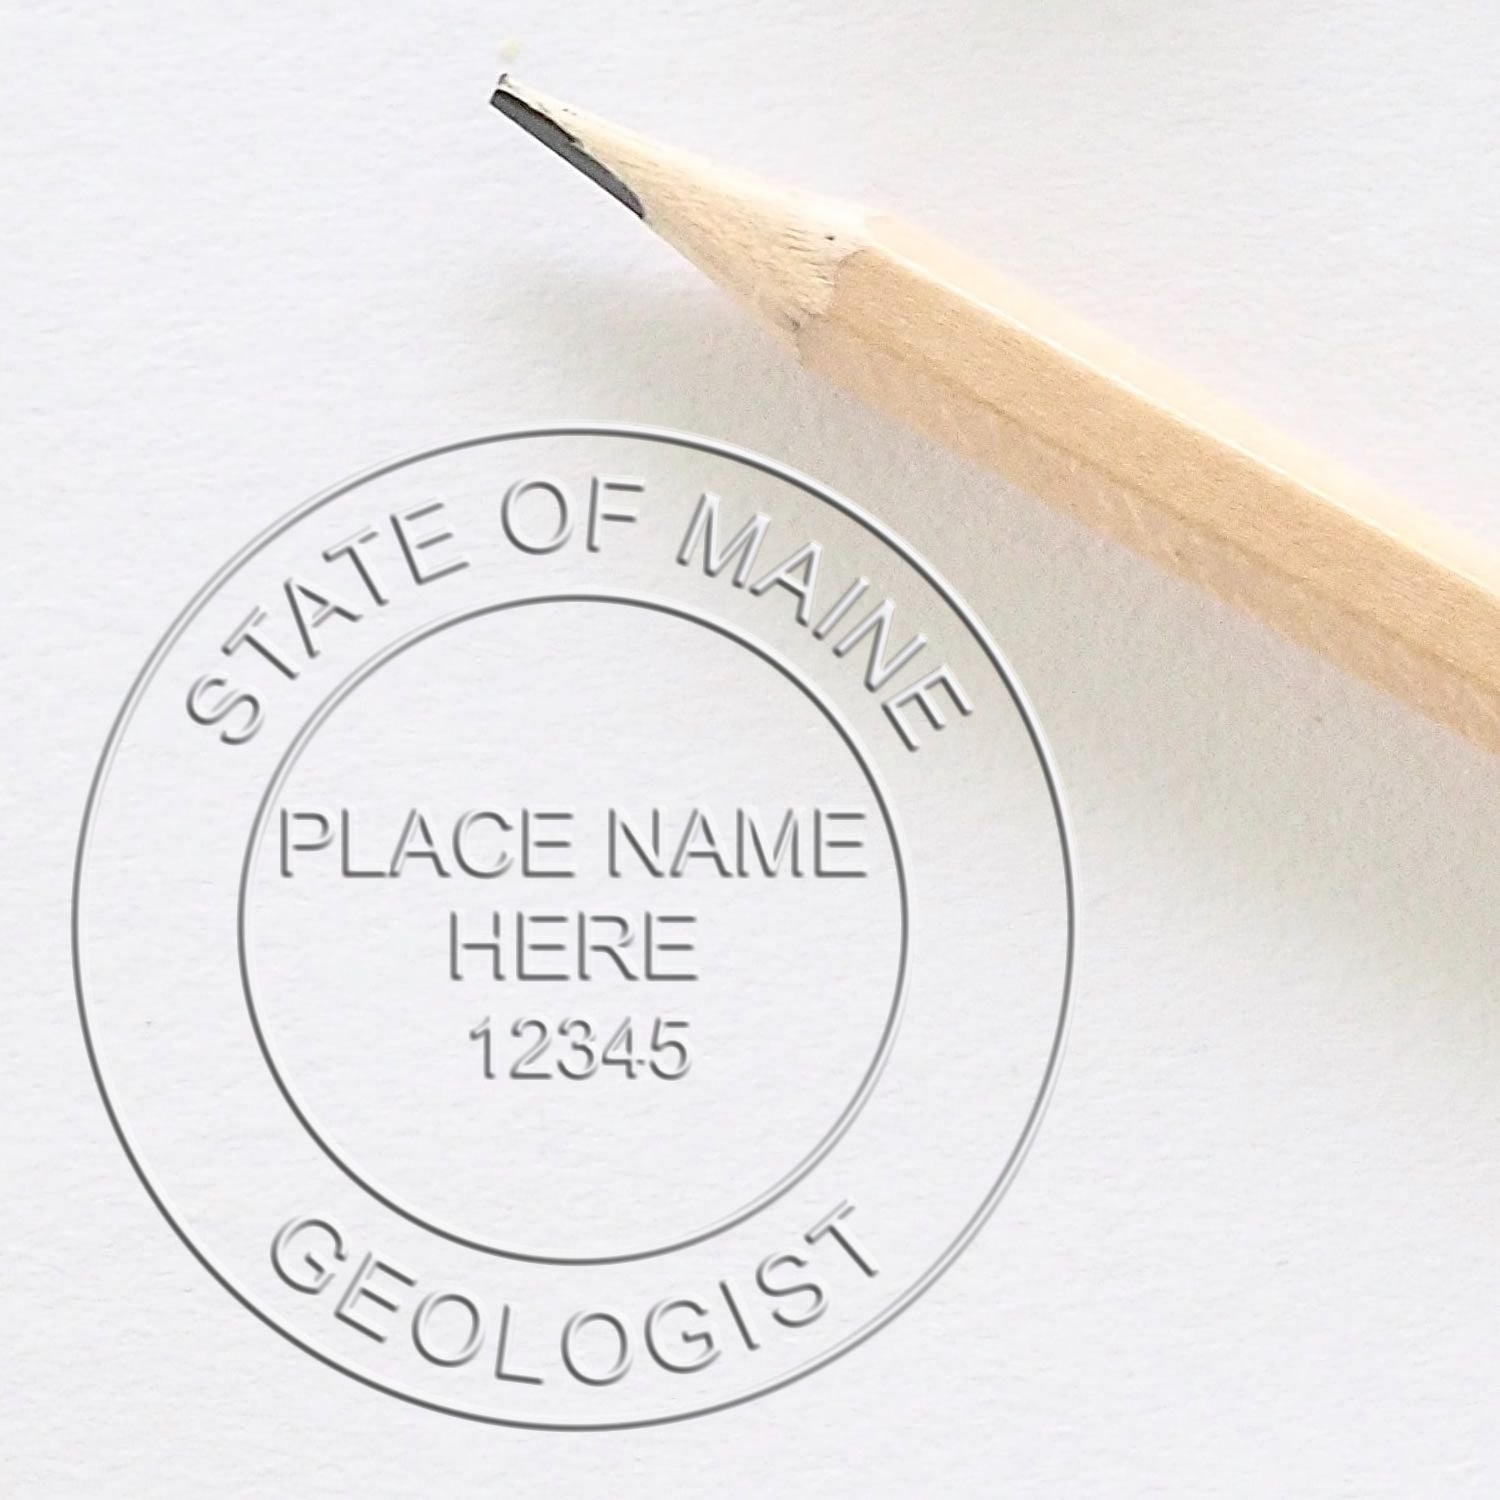 The main image for the Long Reach Maine Geology Seal depicting a sample of the imprint and imprint sample